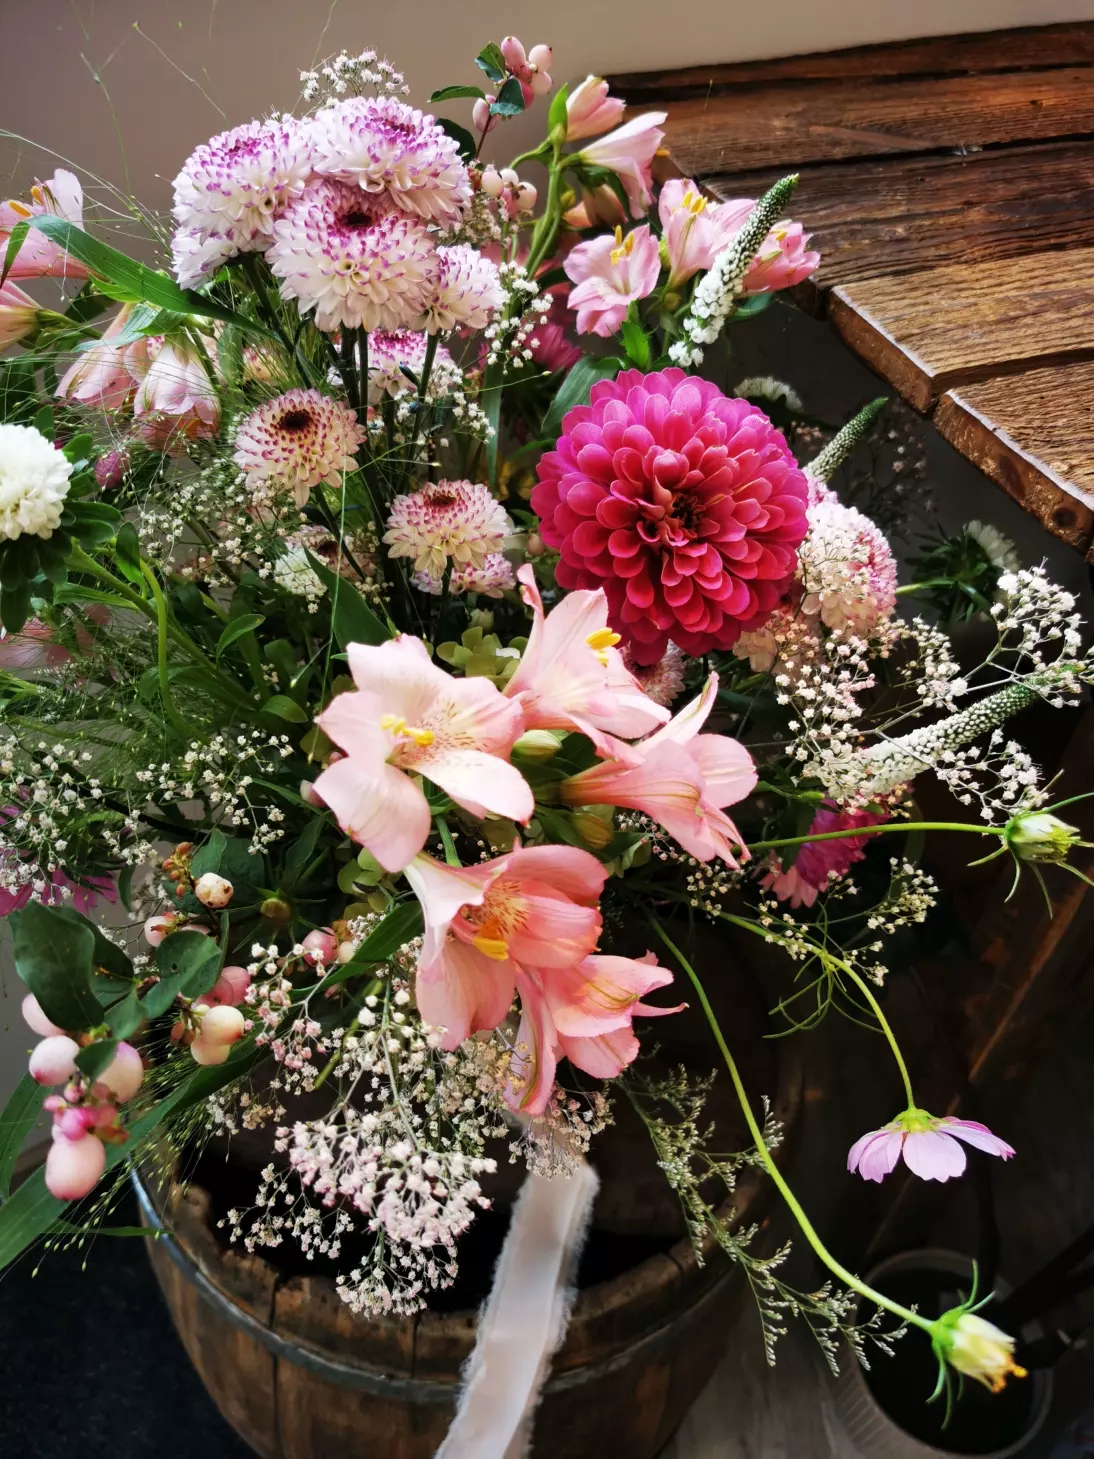 The pink colour has its beautiful counterparts in nature. In this bouquet they are fuchsia zinnias, asters, peachy alstroemerias and pastel margaritas.